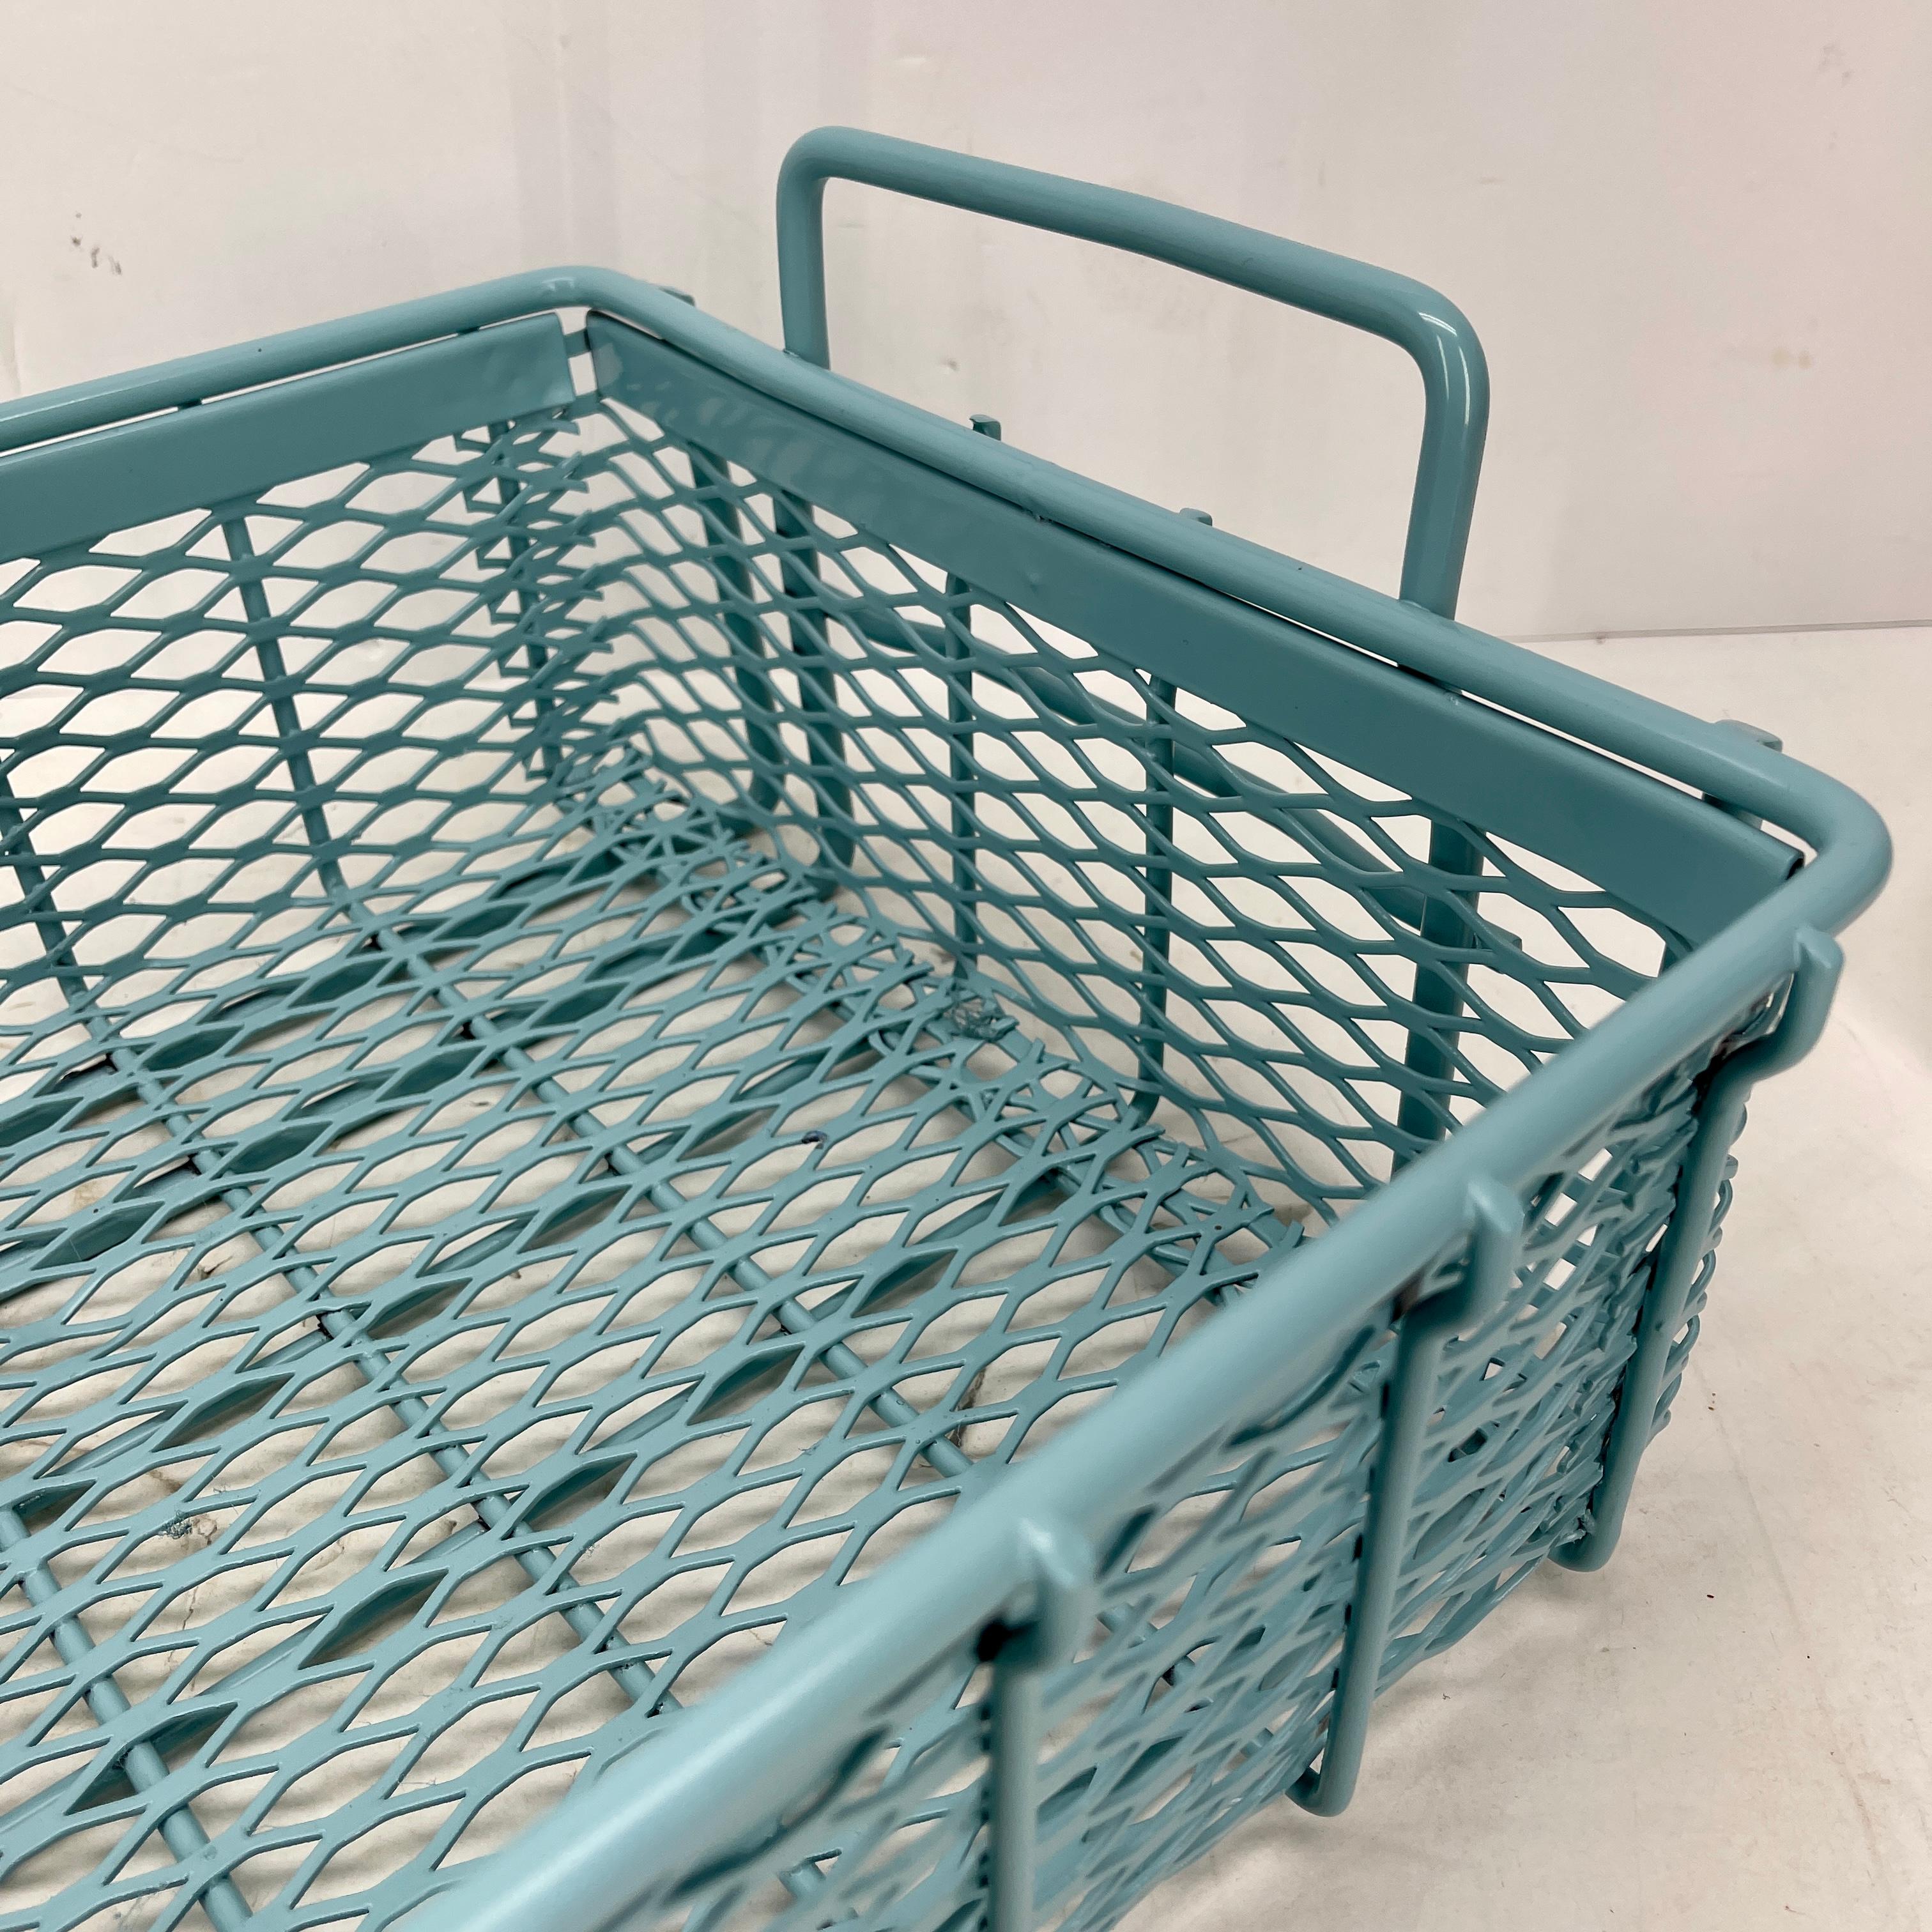 Mid-20th Century Vintage Metal Bin Powder Coated Turquoise, Industrial Era For Sale